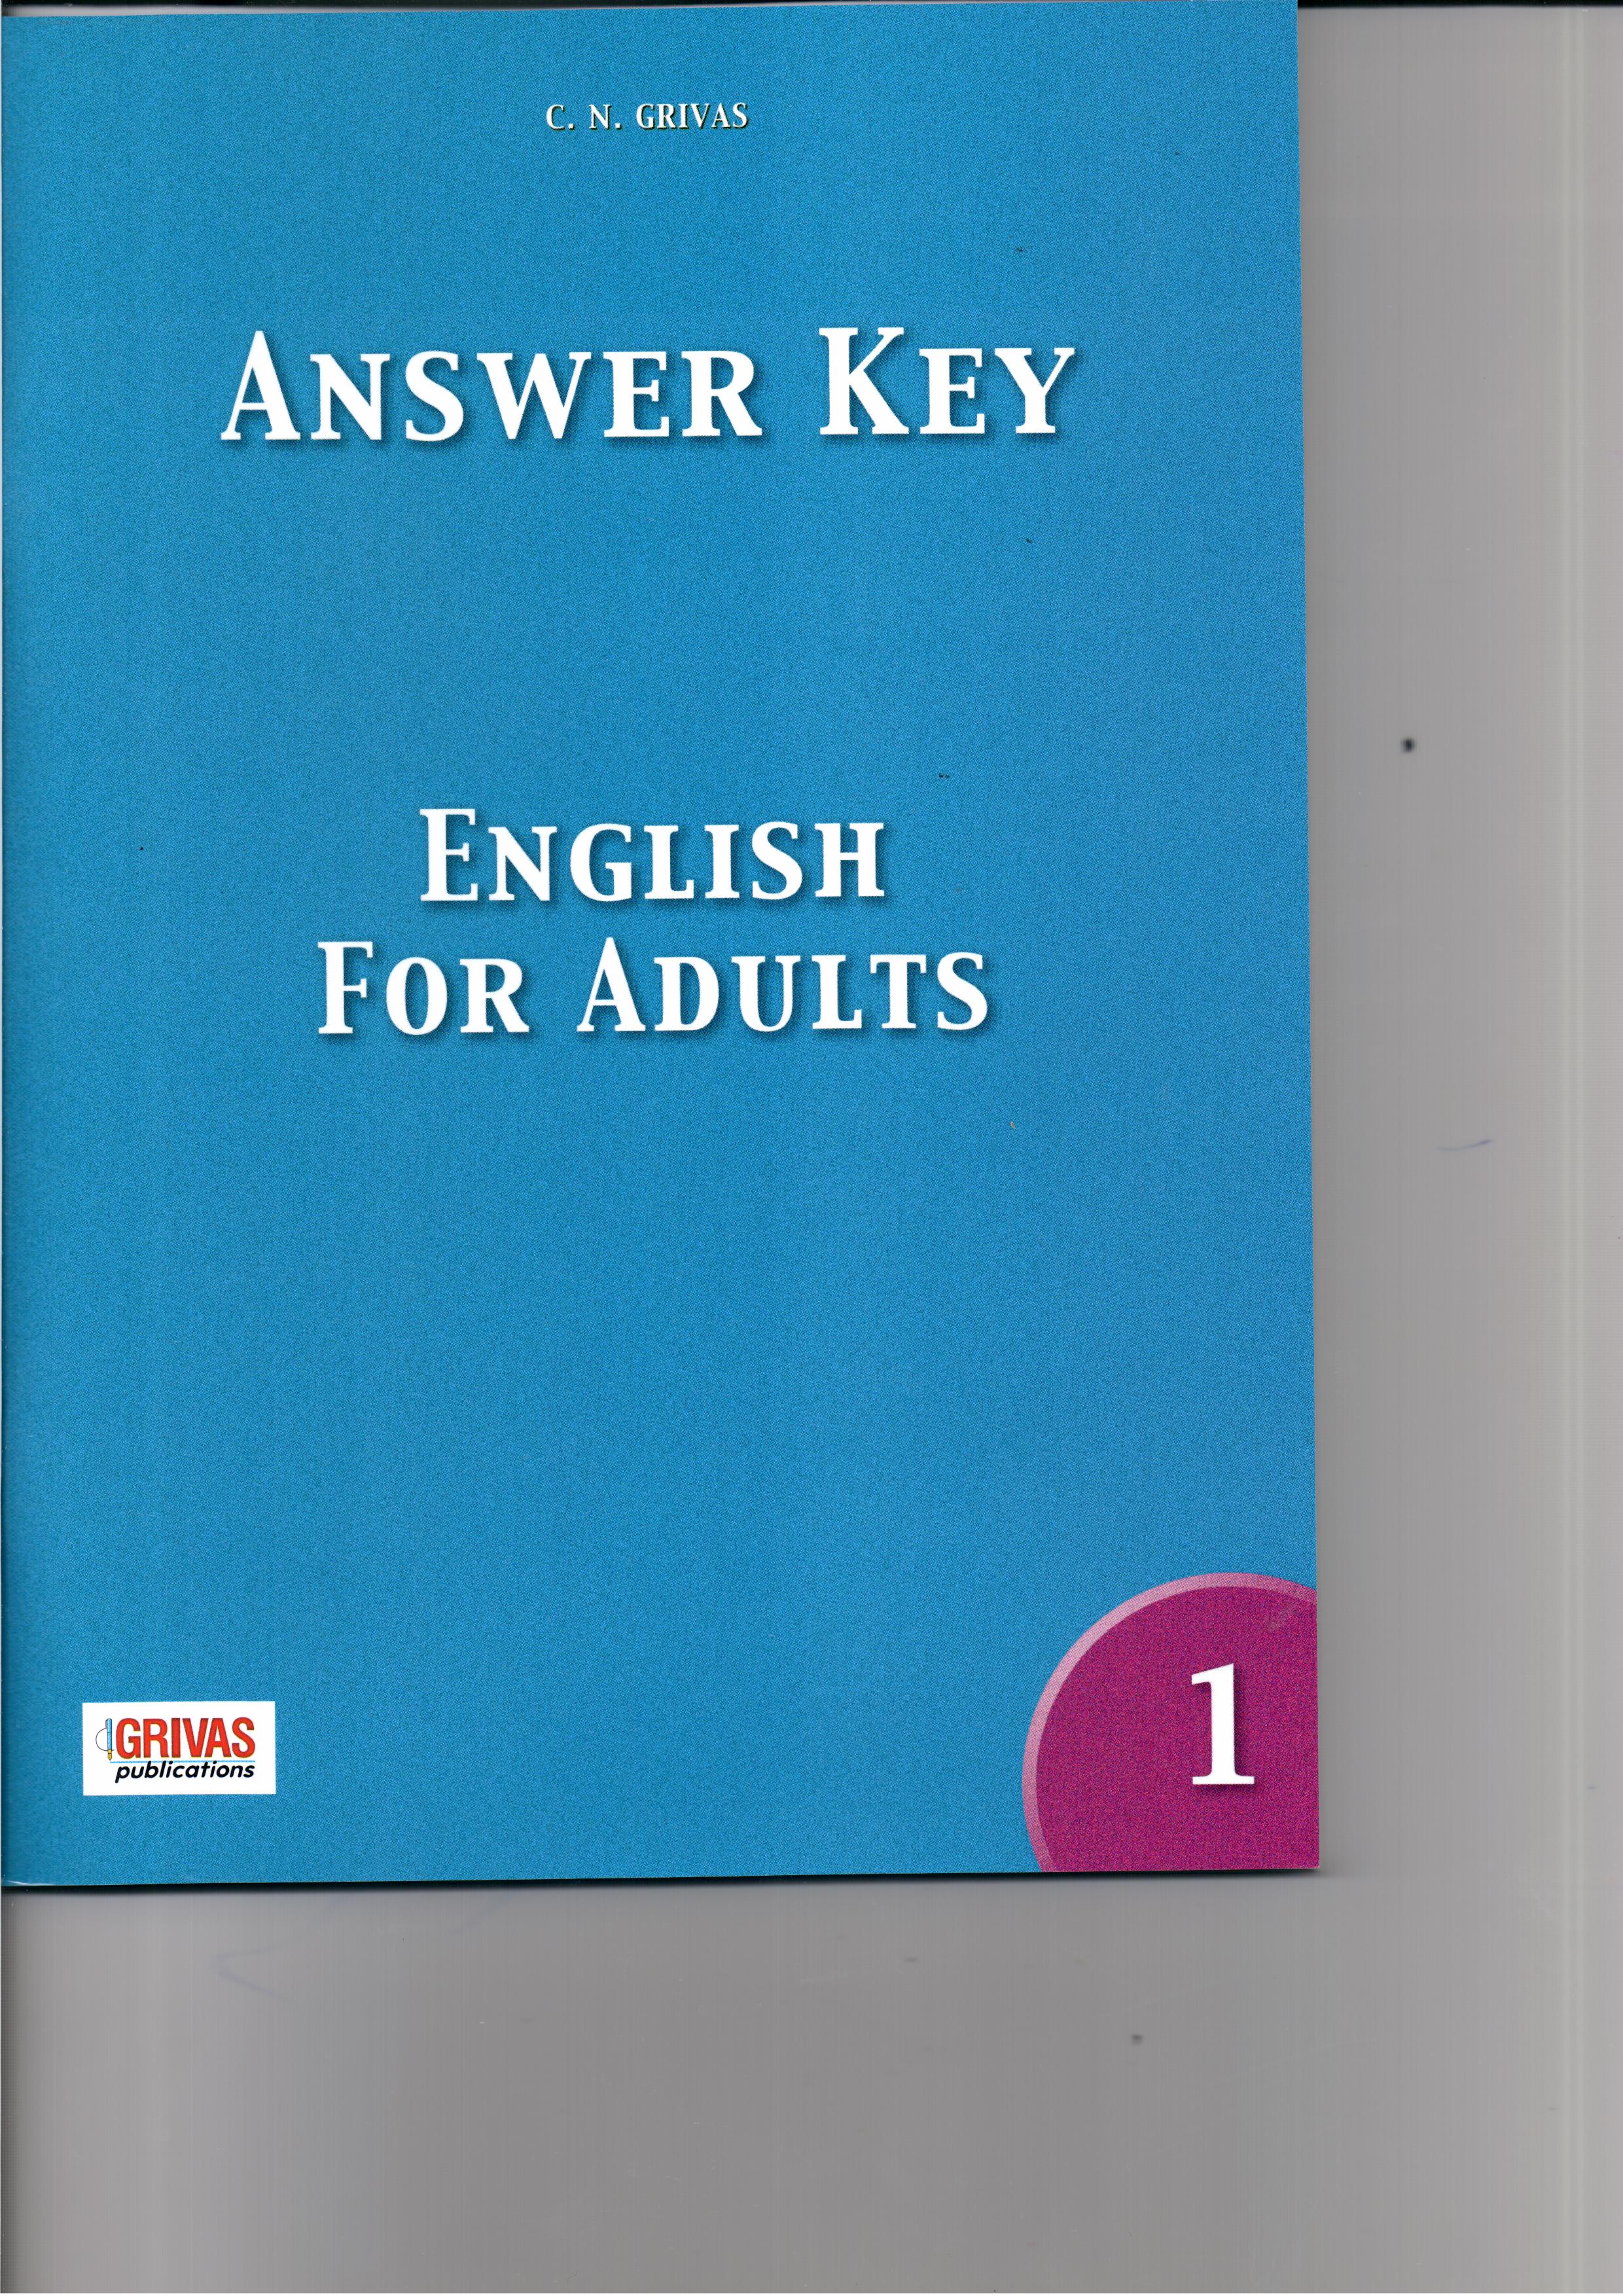 ENGLISH FOR ADULTS 1 KEY